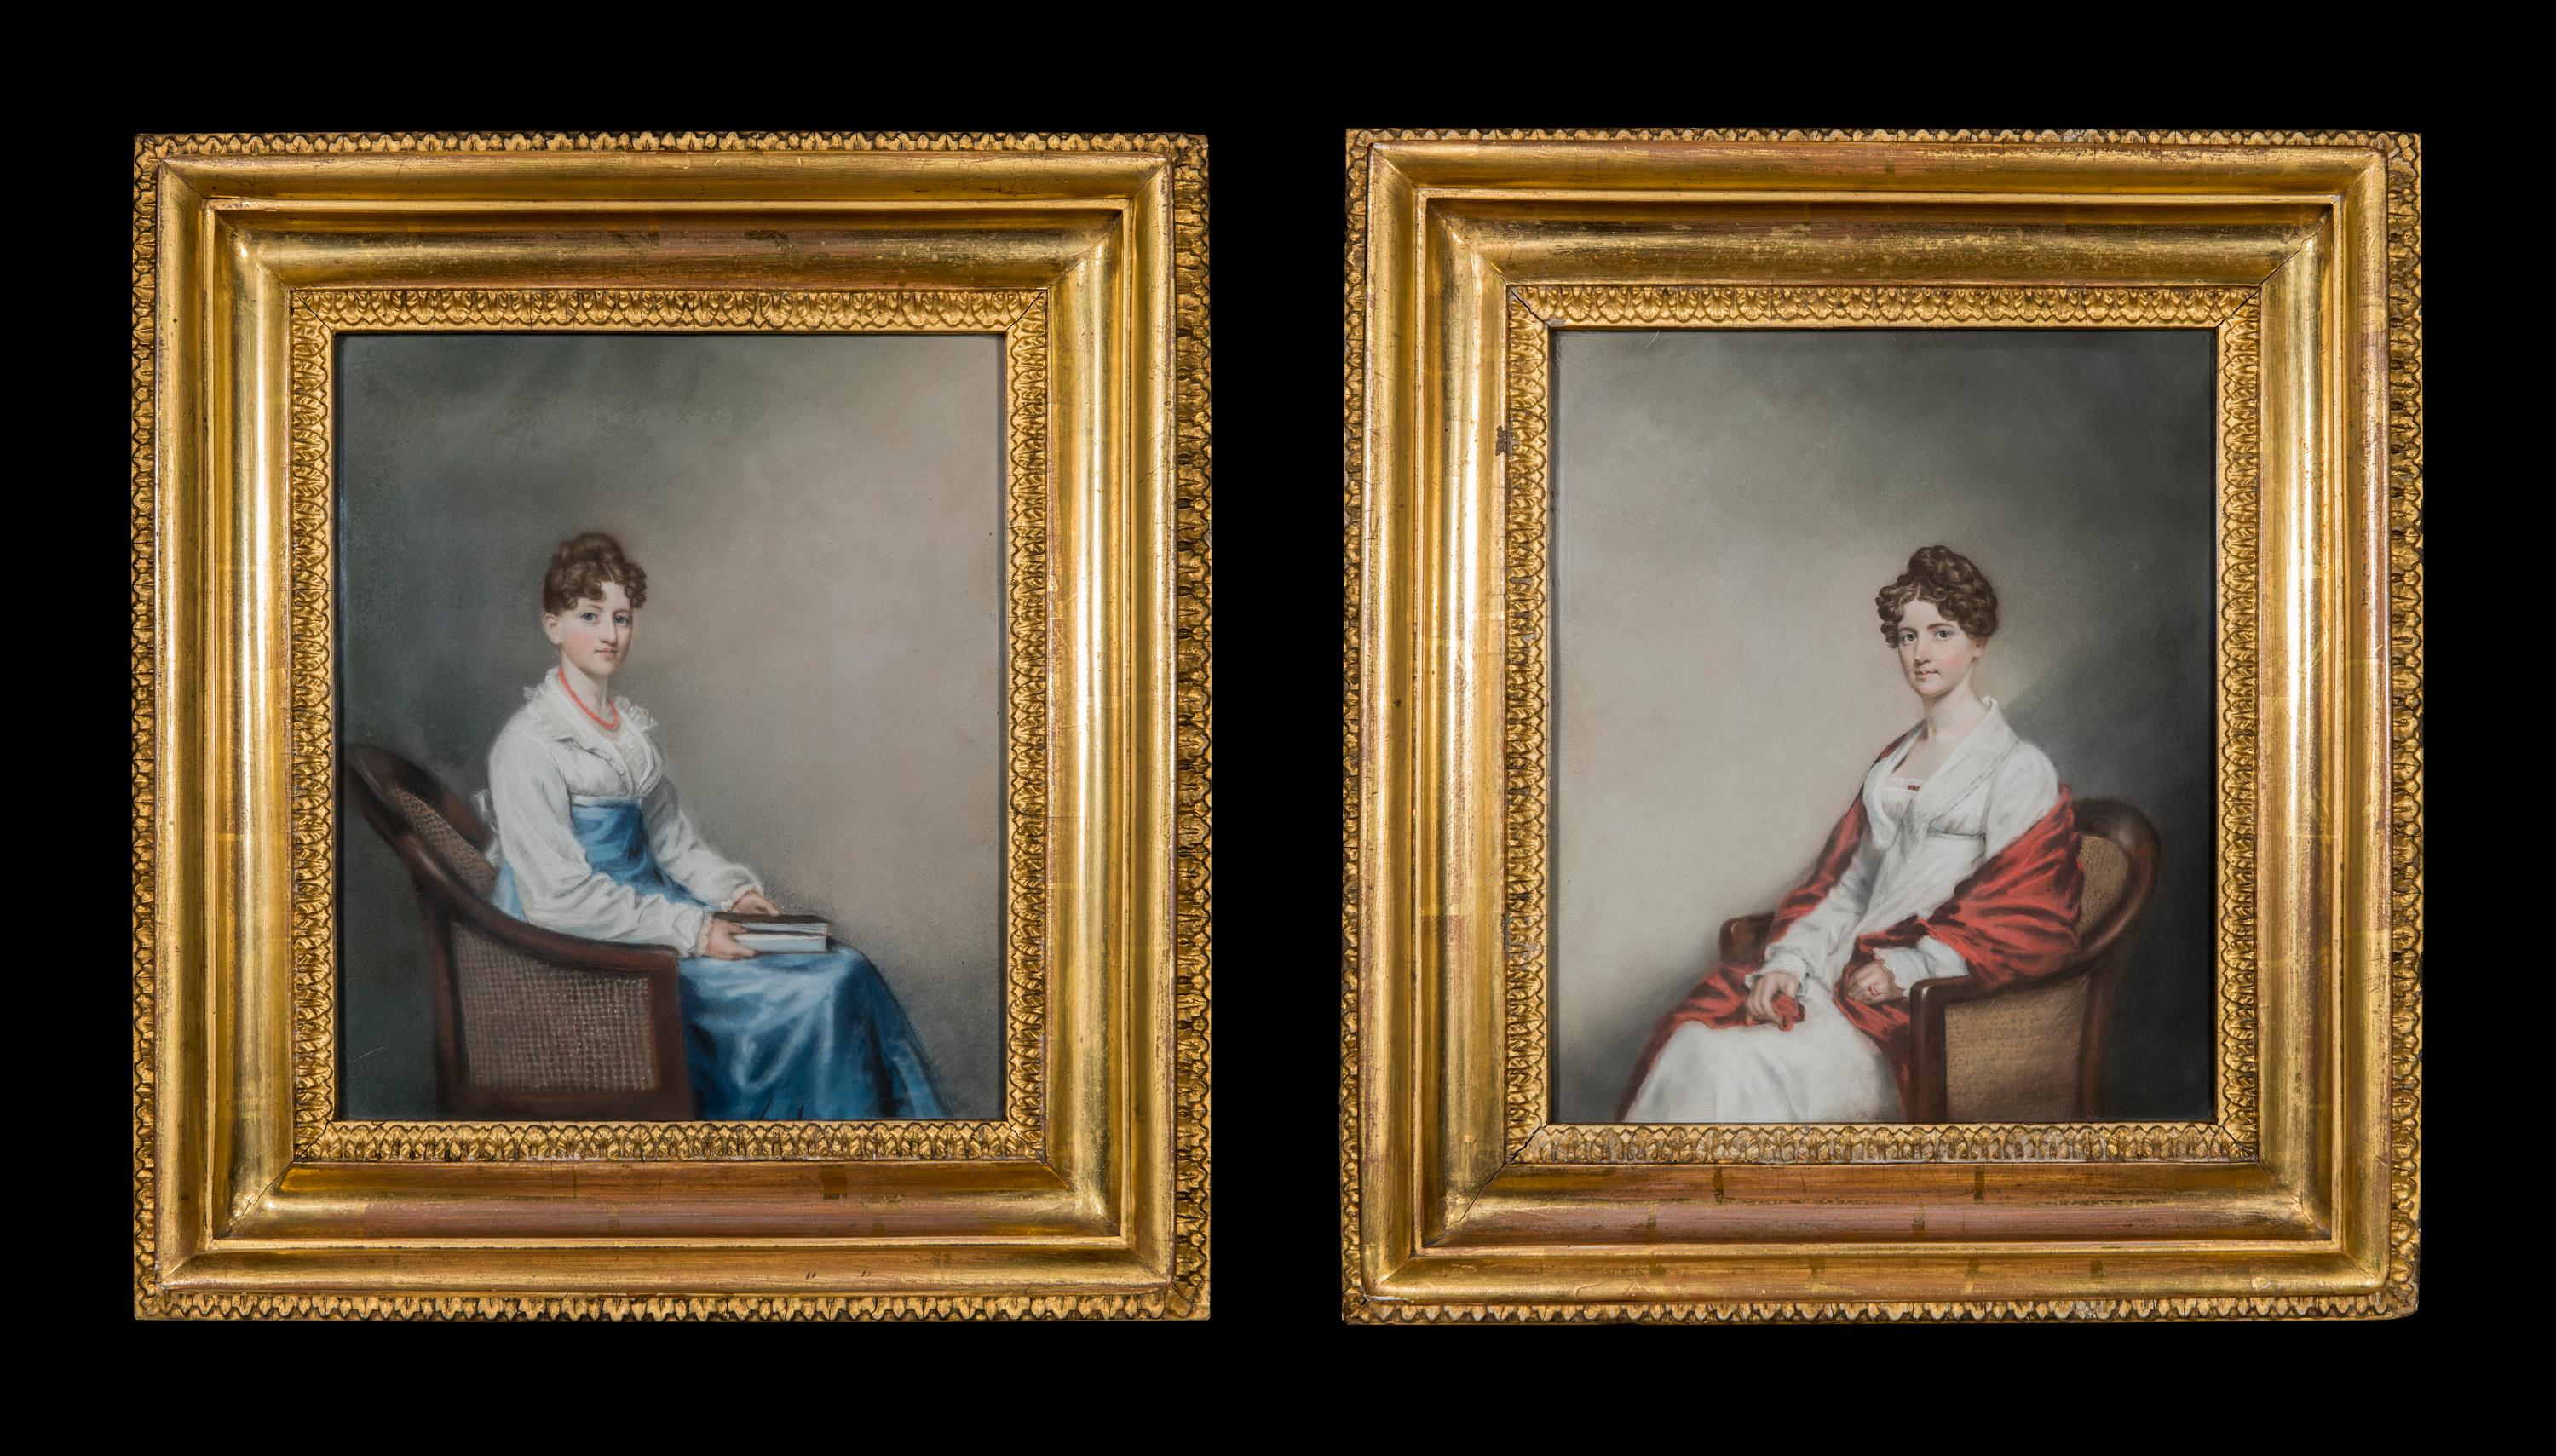 English Rare Pair of Early 19th Century Regency Period Pastel and Watercolor Portraits